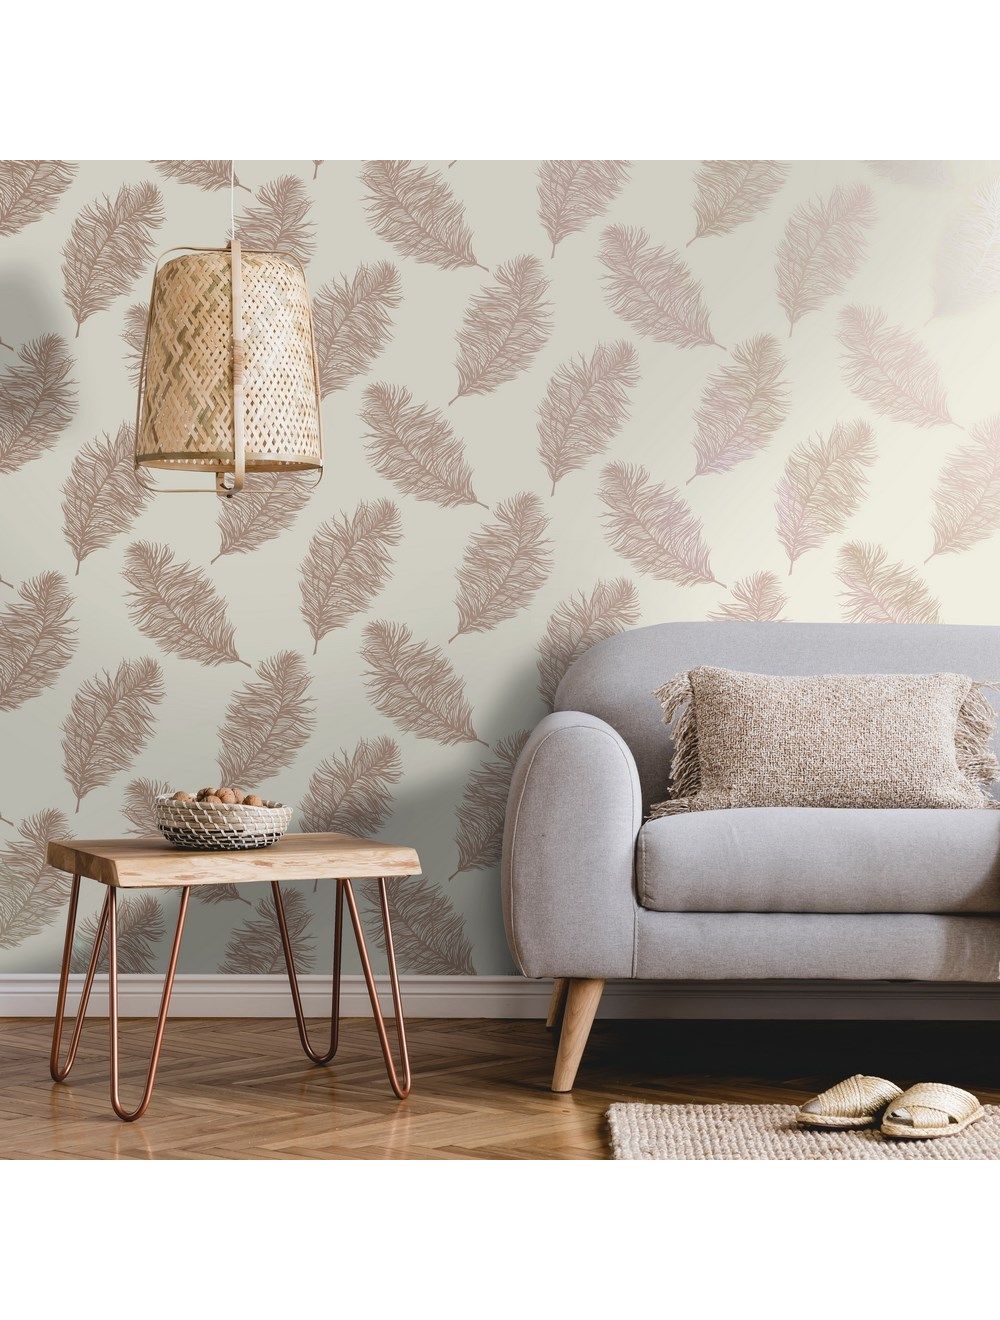 Holden Decor Reflect 2 Fawning Feather Cream Rose Gold Wallpaper 12627 -  DecorSave Wallpapers